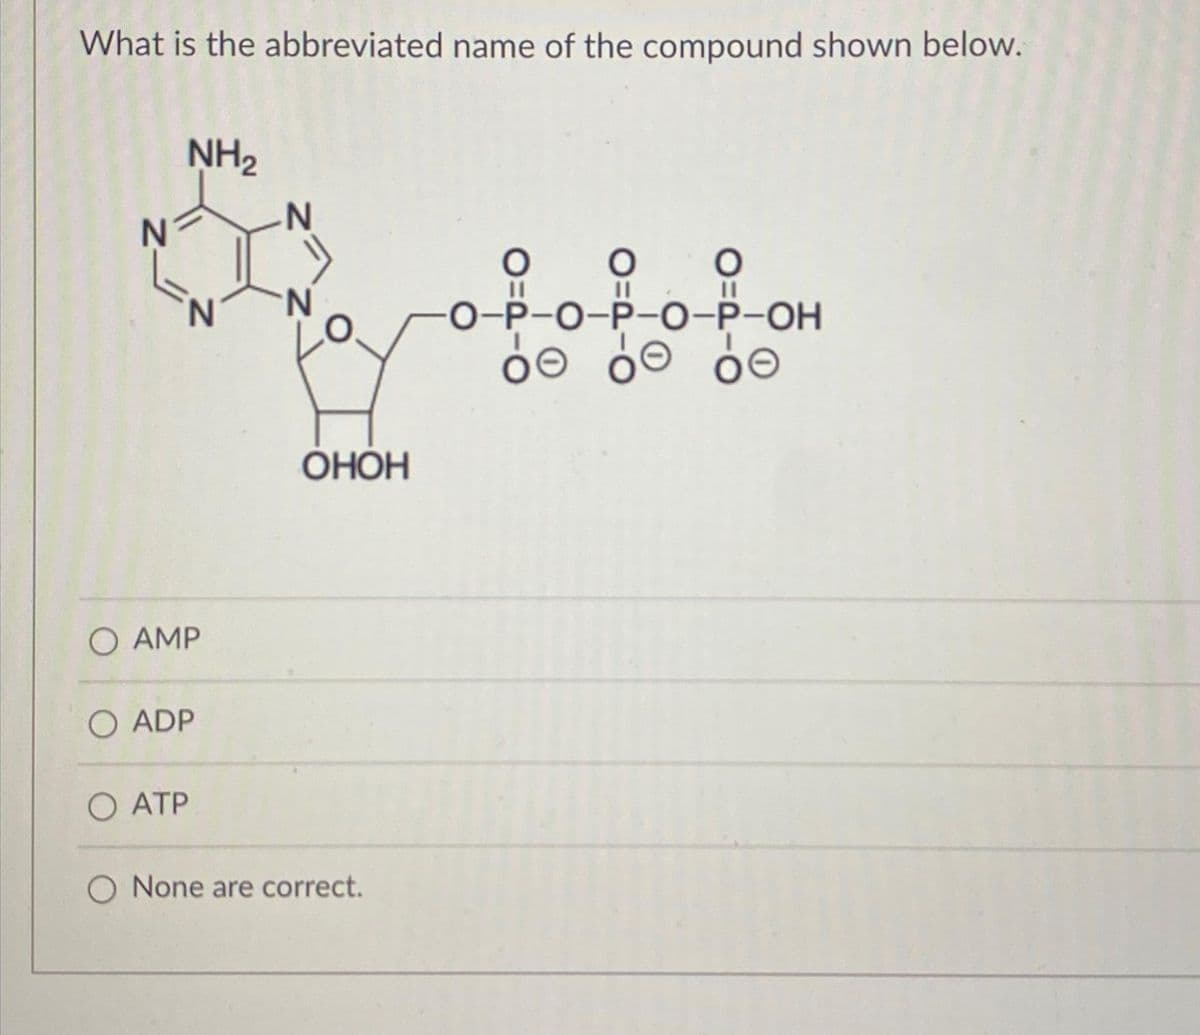 What is the abbreviated name of the compound shown below.
NH₂
Z
O AMP
O ATP
O ADP
ОНОН
O None are correct.
||
O
||
O=
P-O-P-O-P-OH
ὀΘ óe be